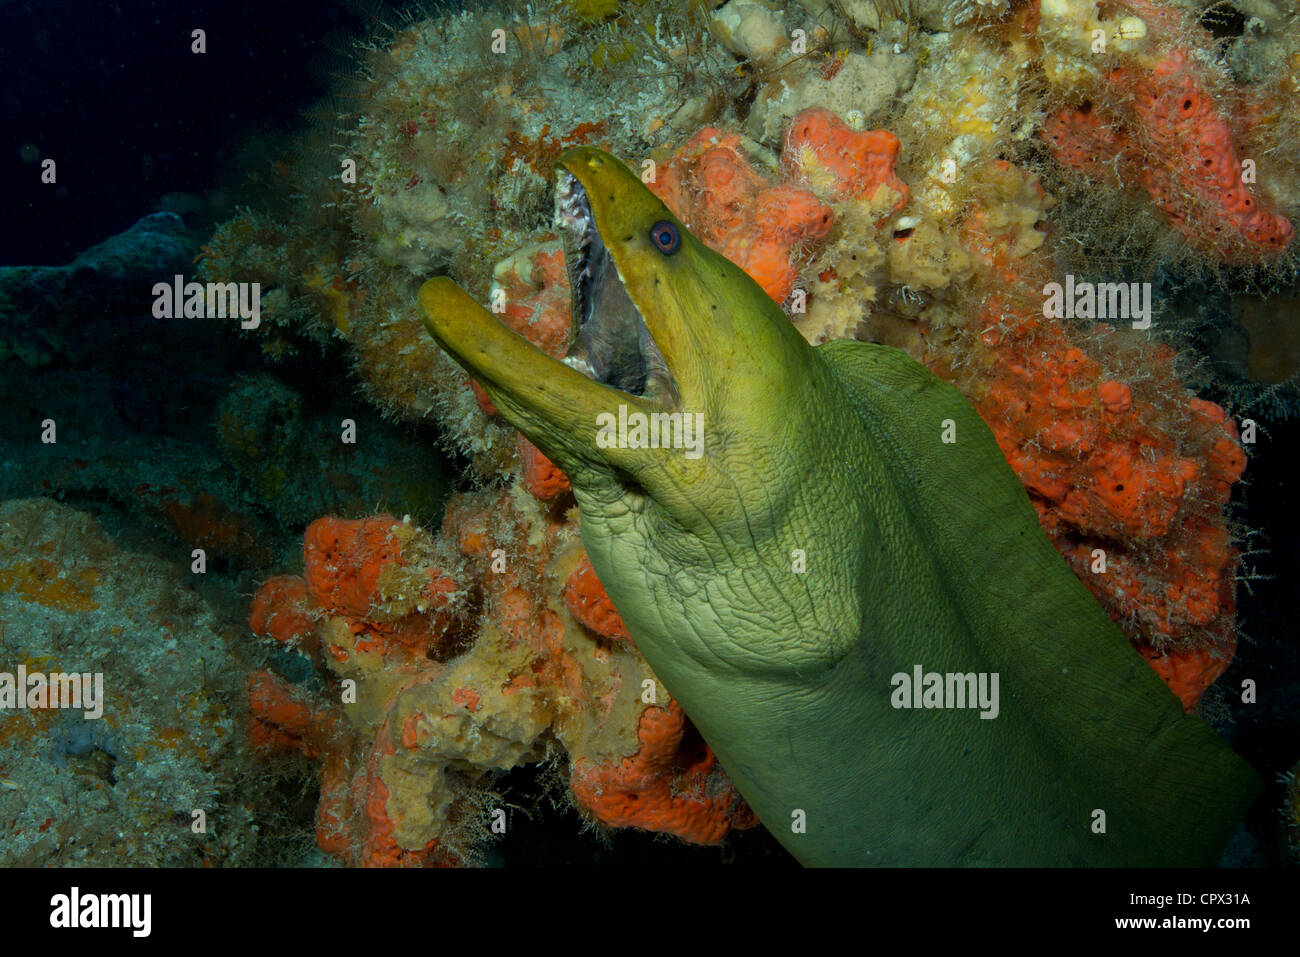 Gaping mouth of Green Moray Eel Stock Photo